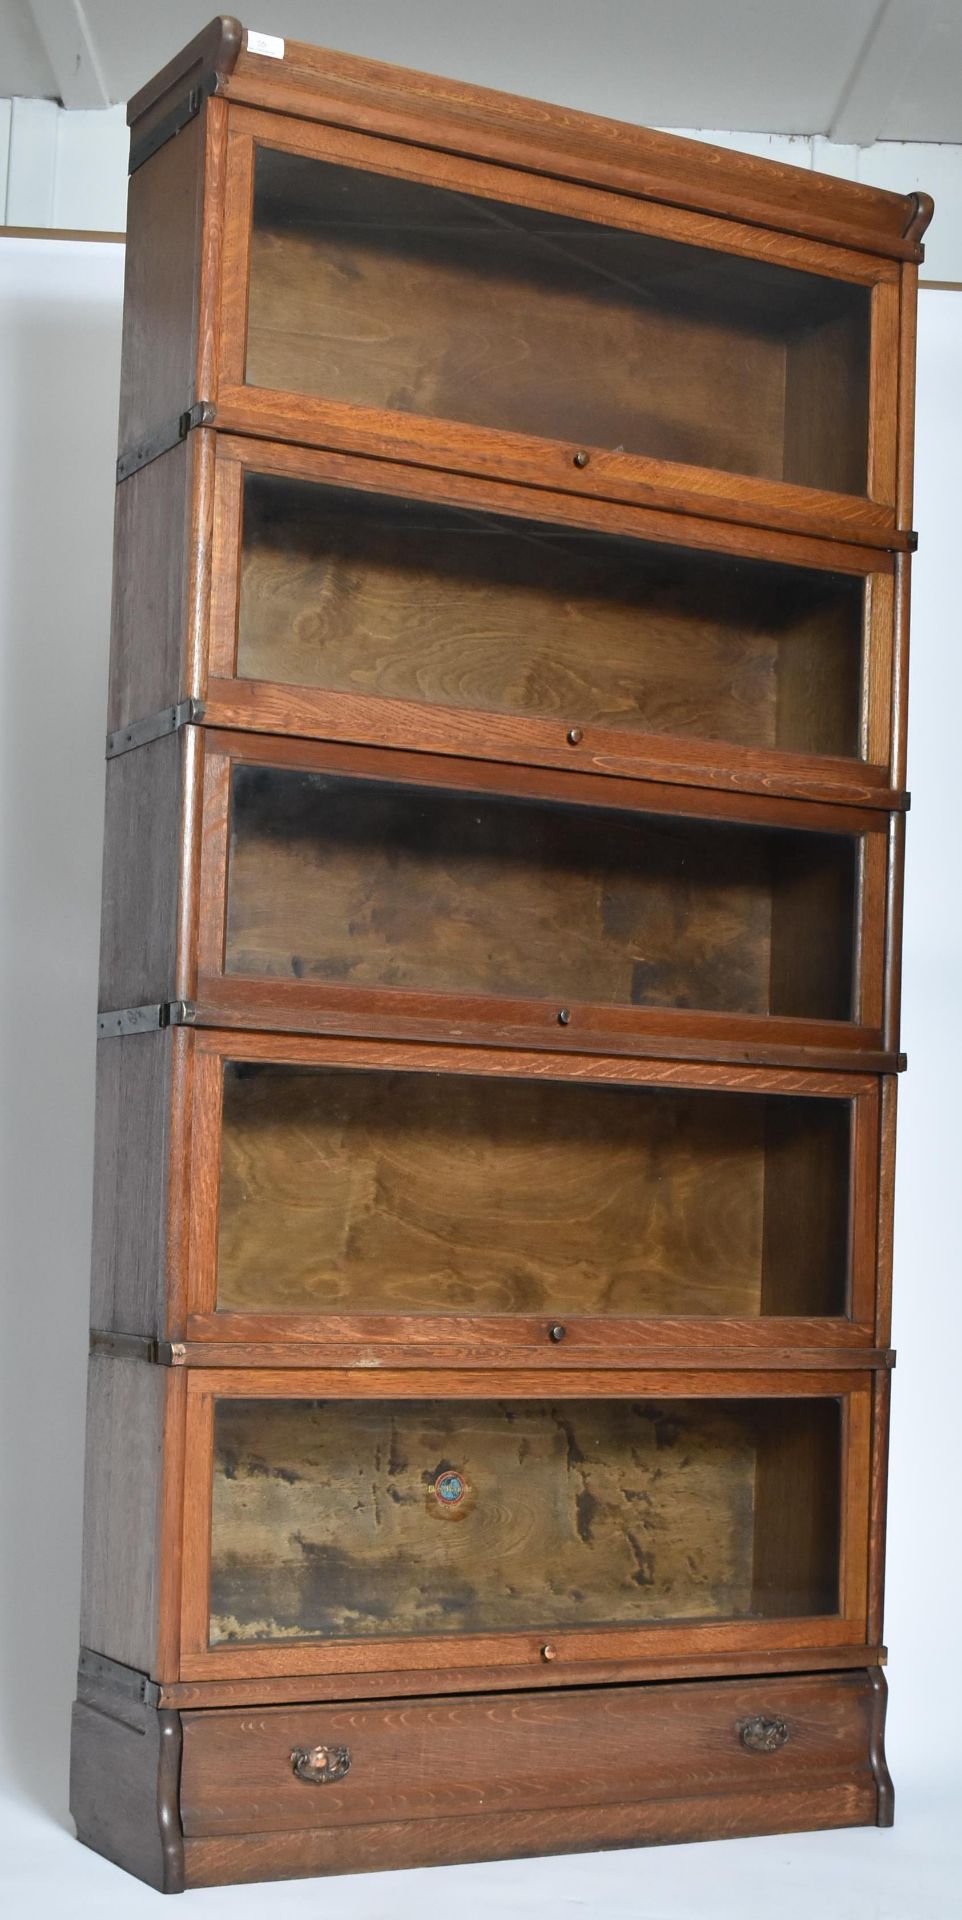 GLOBE WERNICKE - SIX-TIER OAK STACKING LIBRARY BOOKCASE - Image 3 of 7